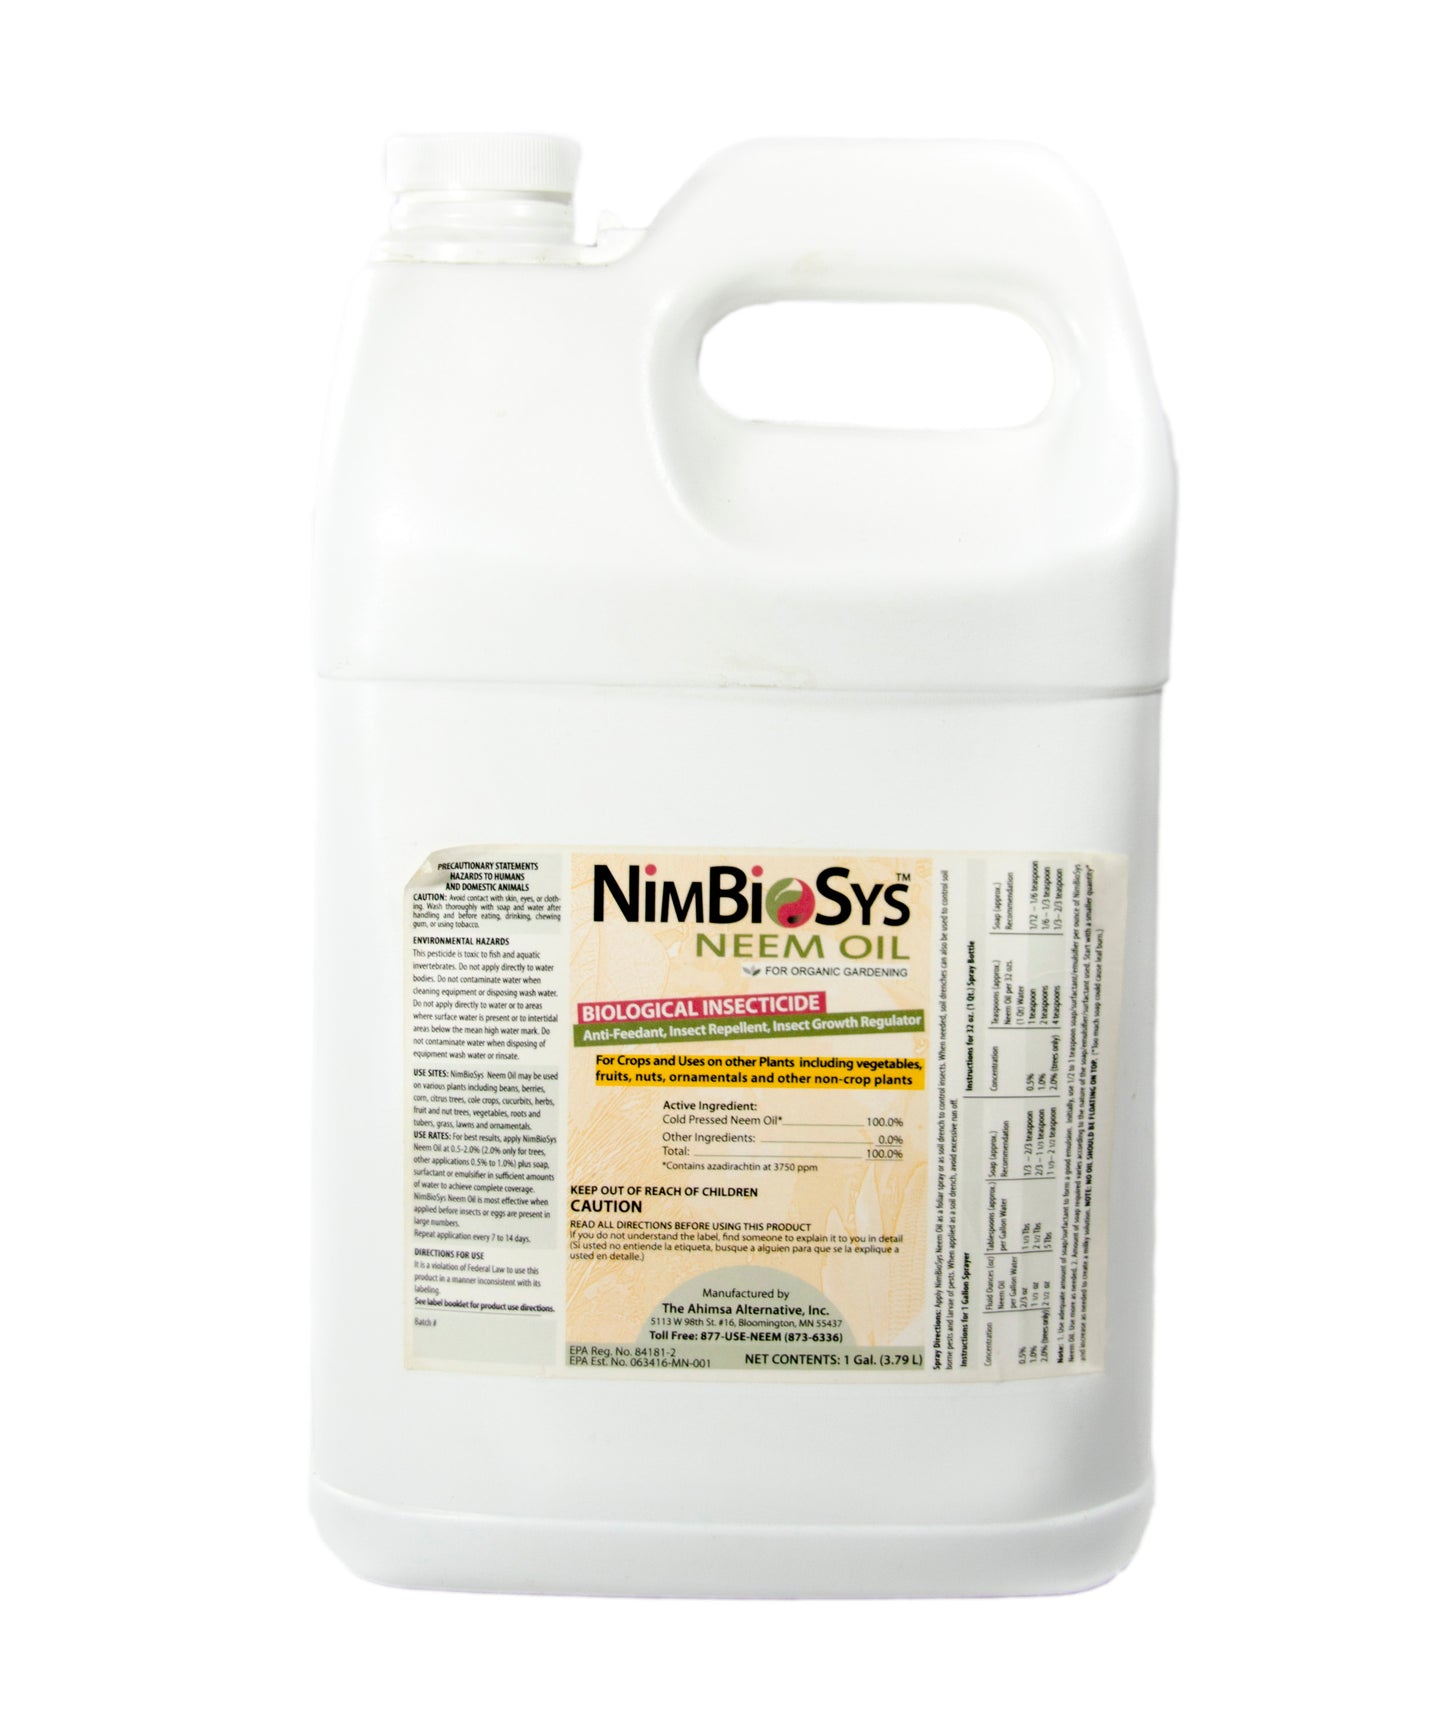 NimBioSys 100% Cold-Pressed Neem Oil Insecticide